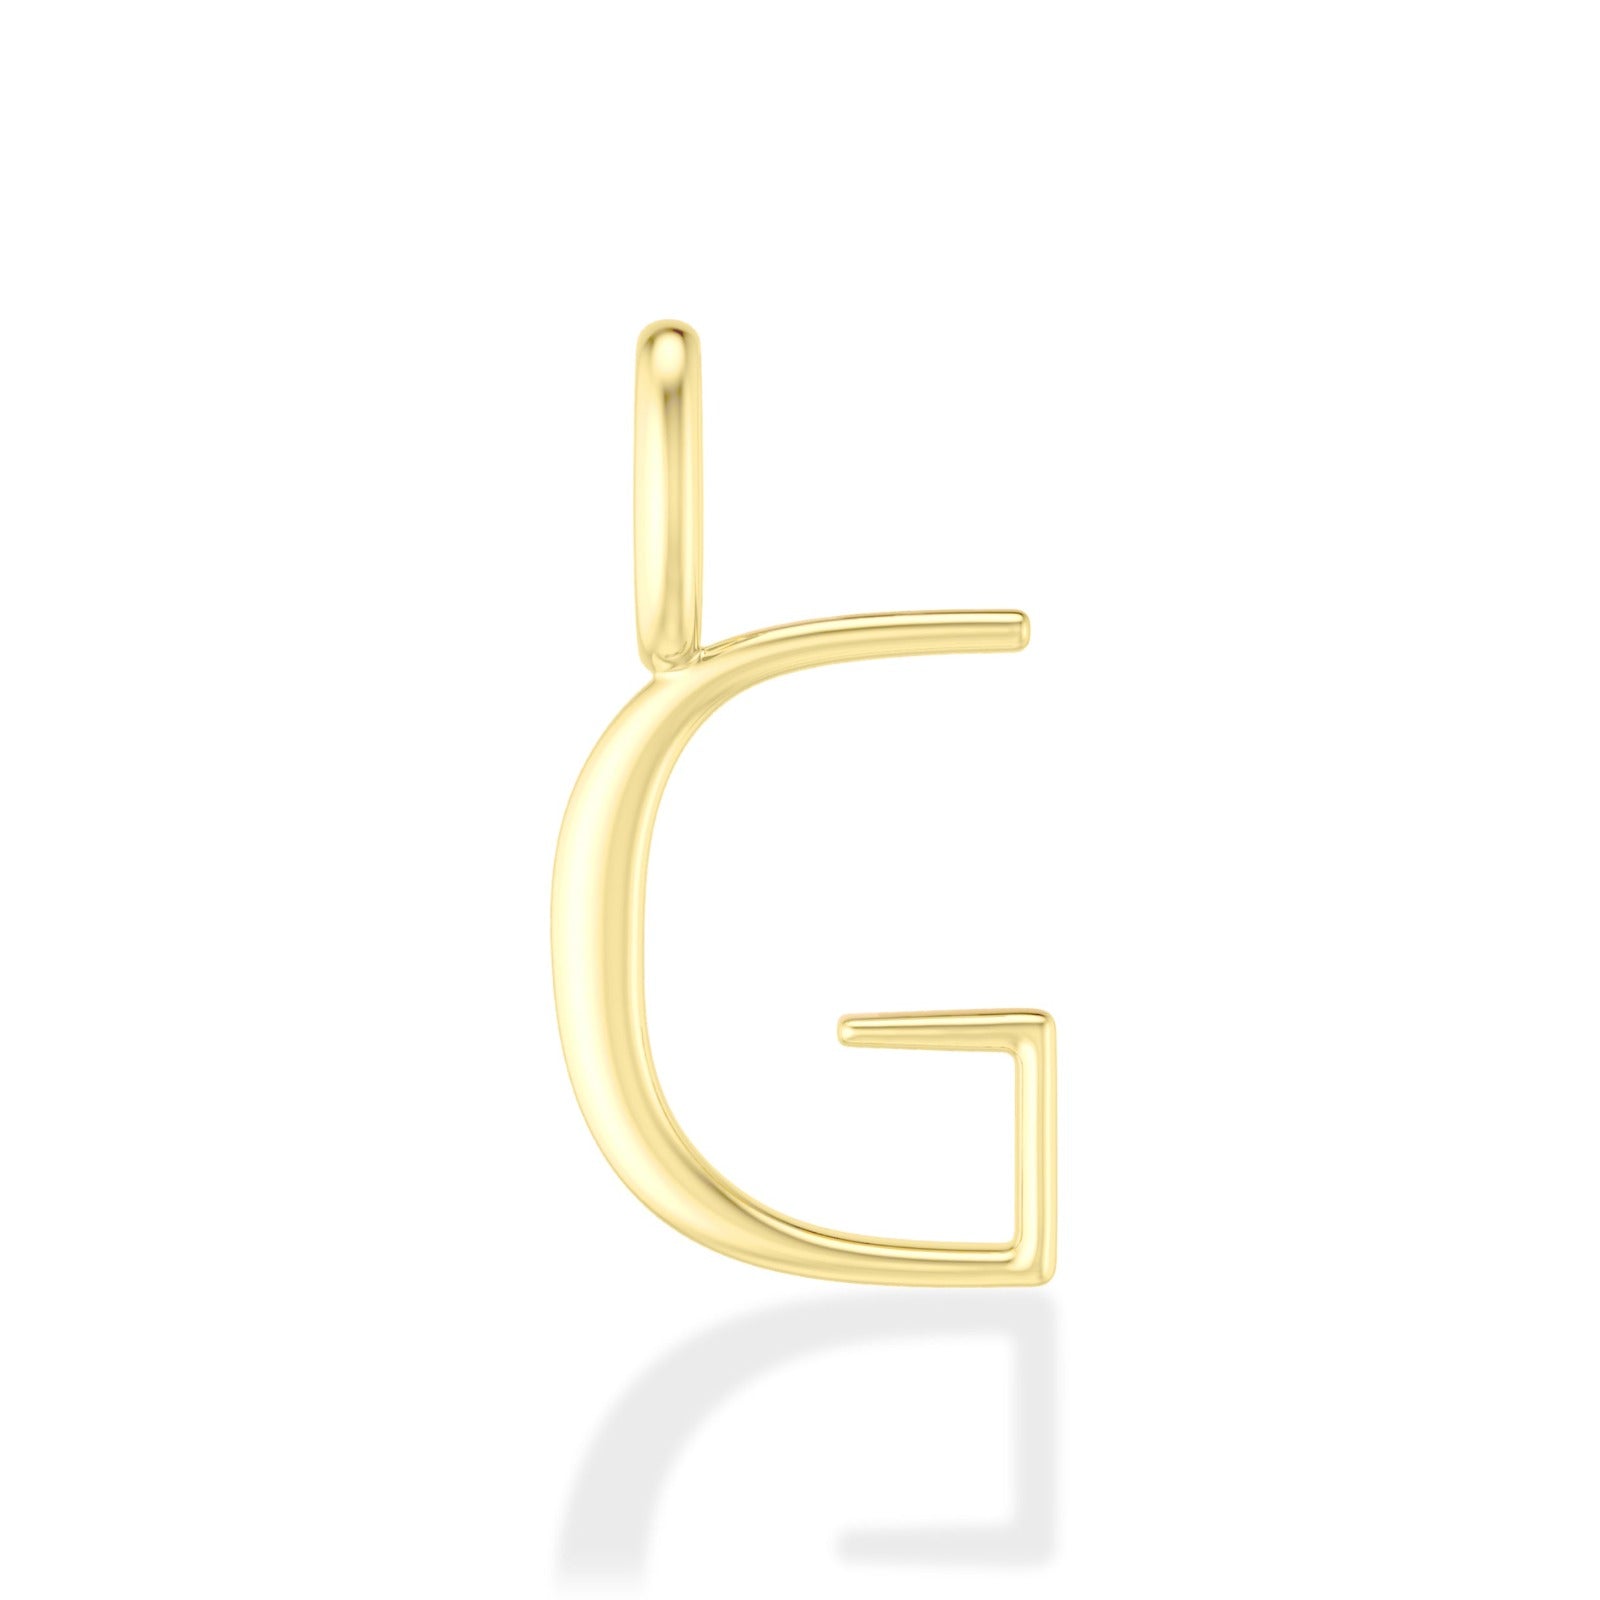 14K yellow gold G letter charm. 